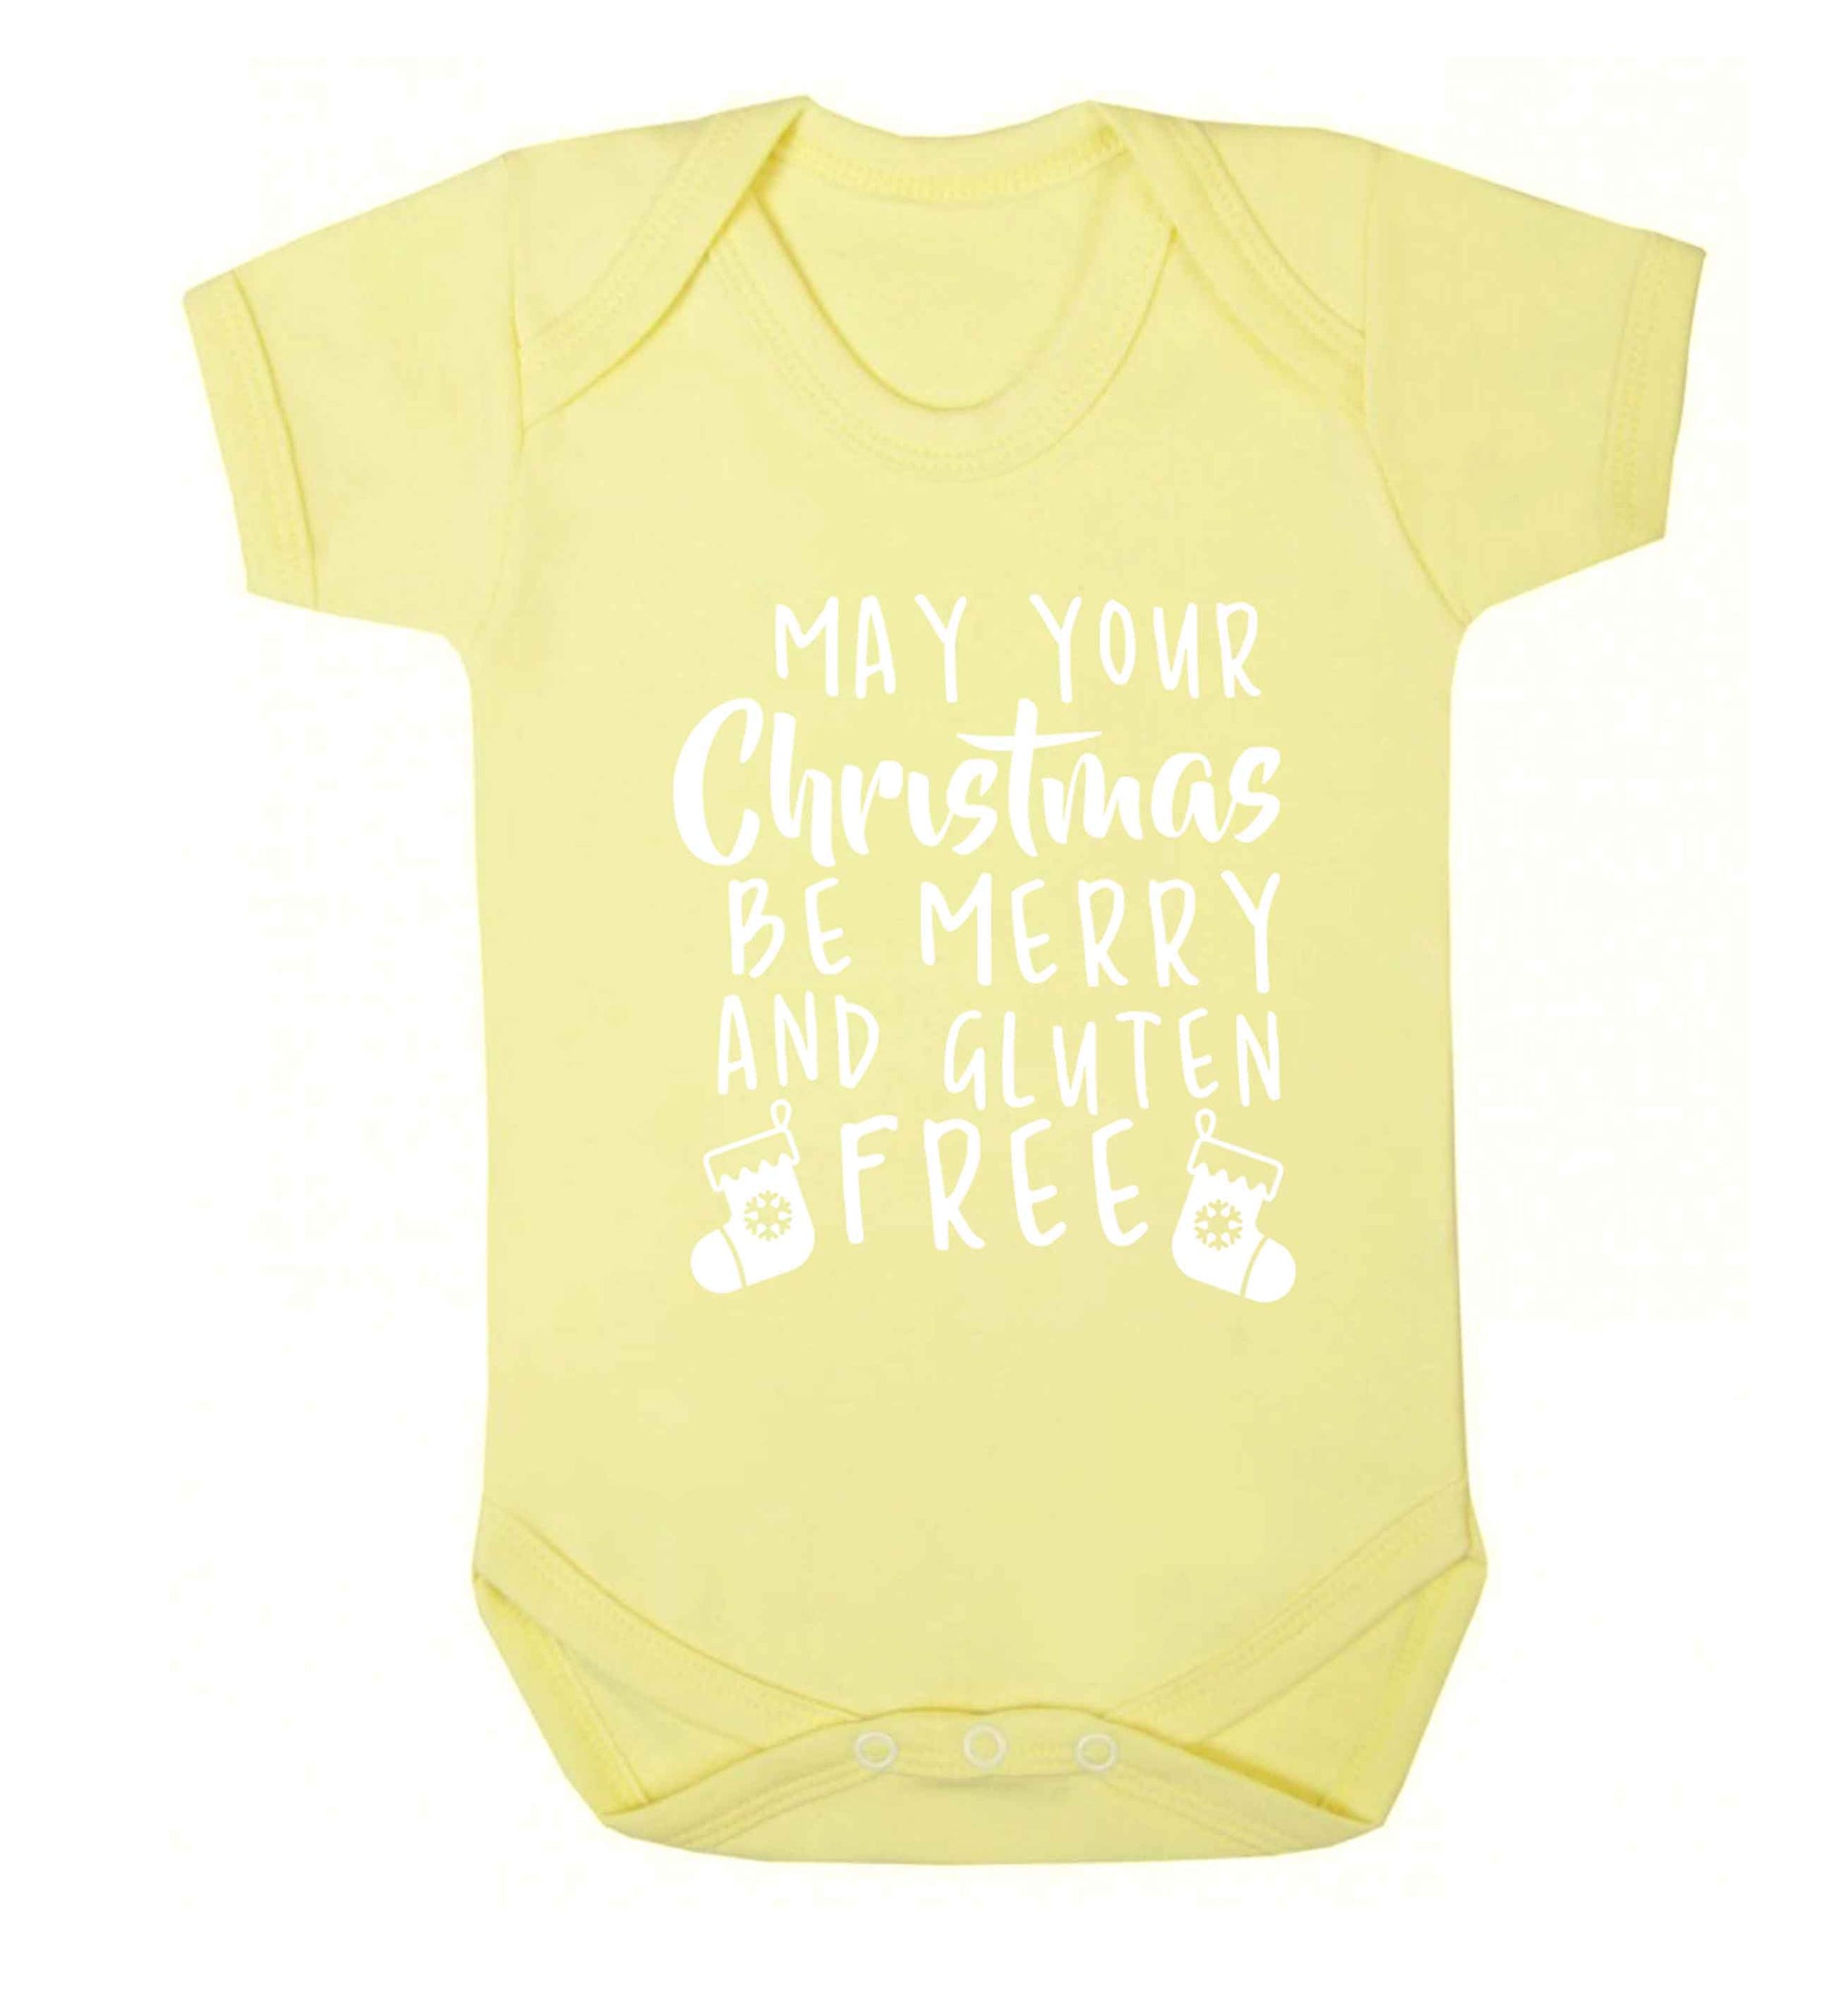 May your Christmas be merry and gluten free Baby Vest pale yellow 18-24 months